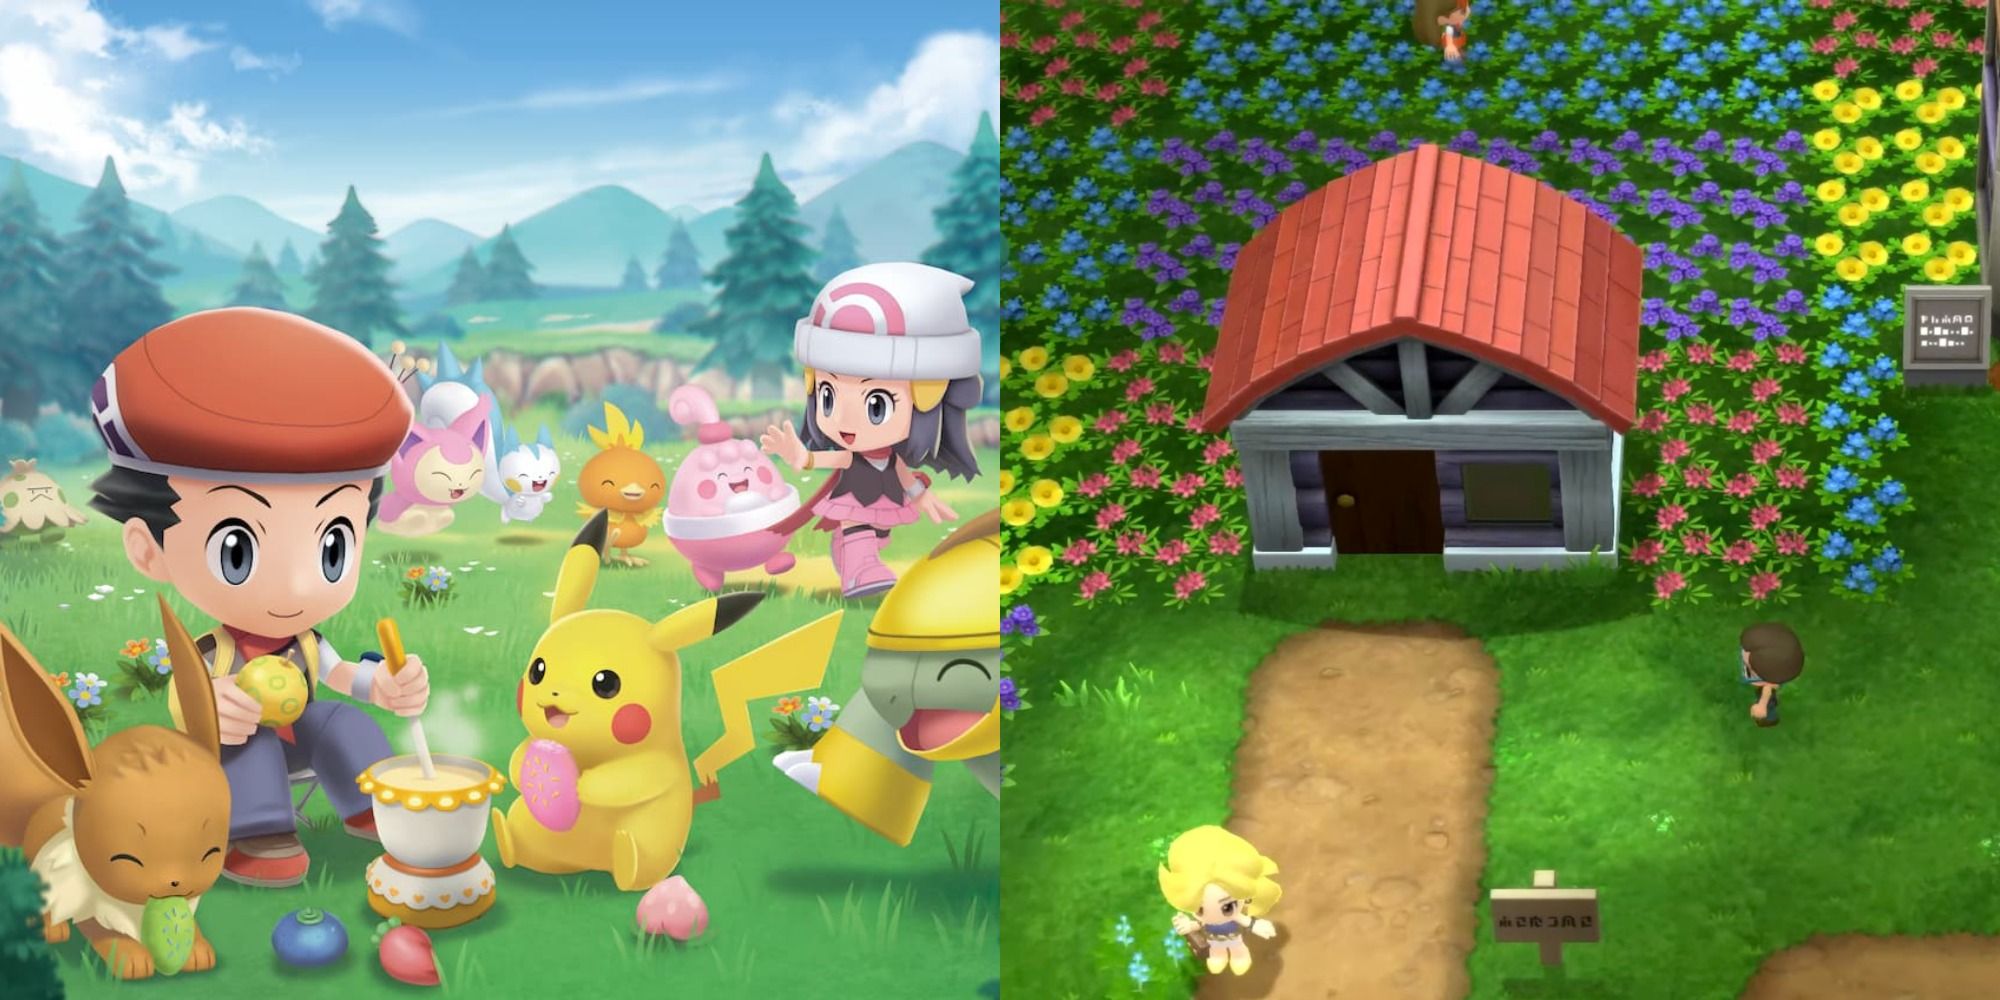 Split image showing Lucas and Dawn with some Pokémon, and Floaroma Town as seen in Pokémon BDSP